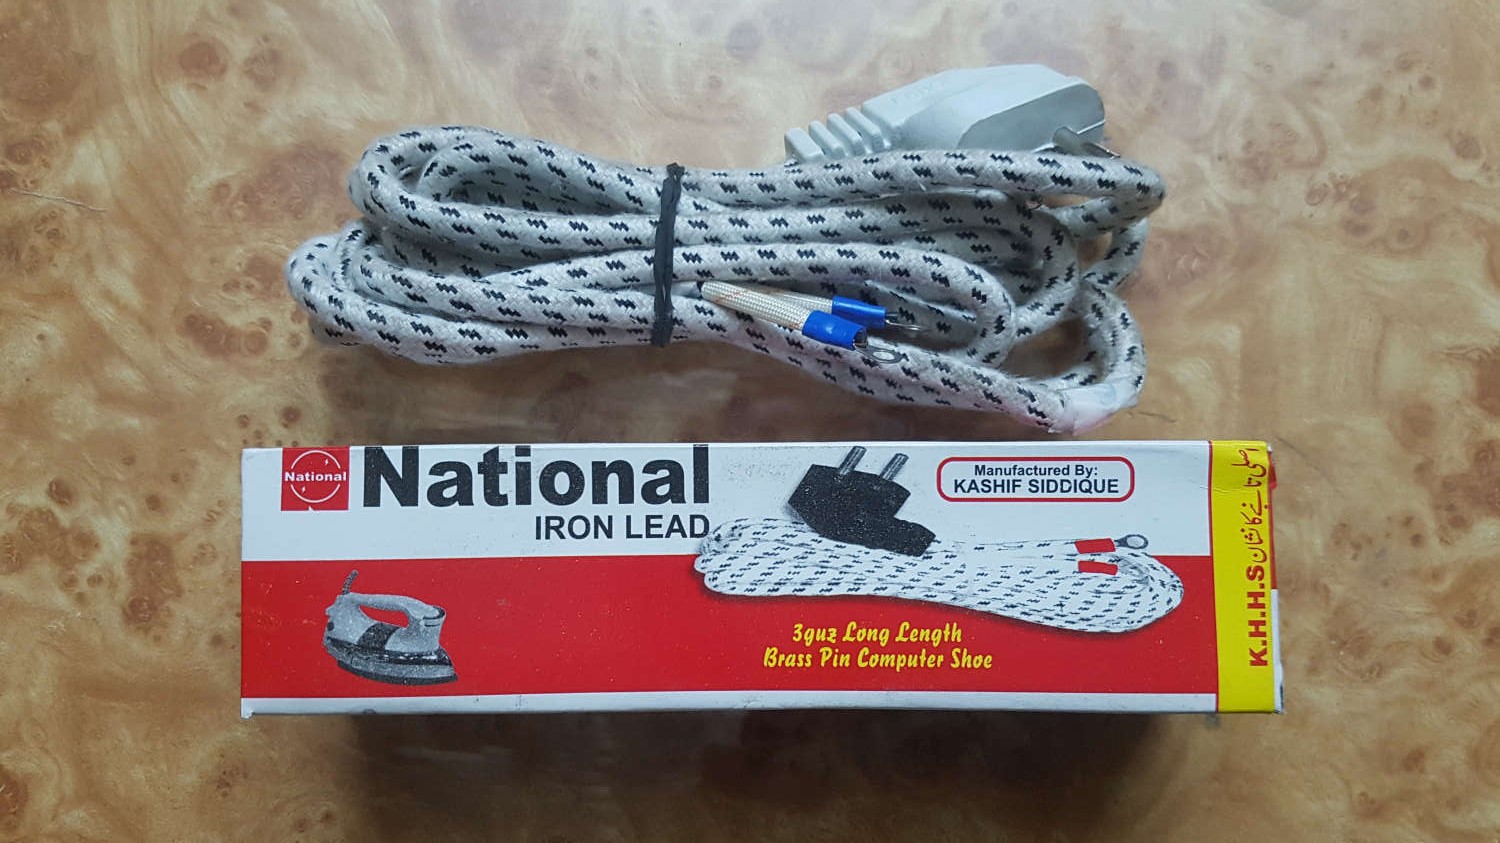 electric iron cable